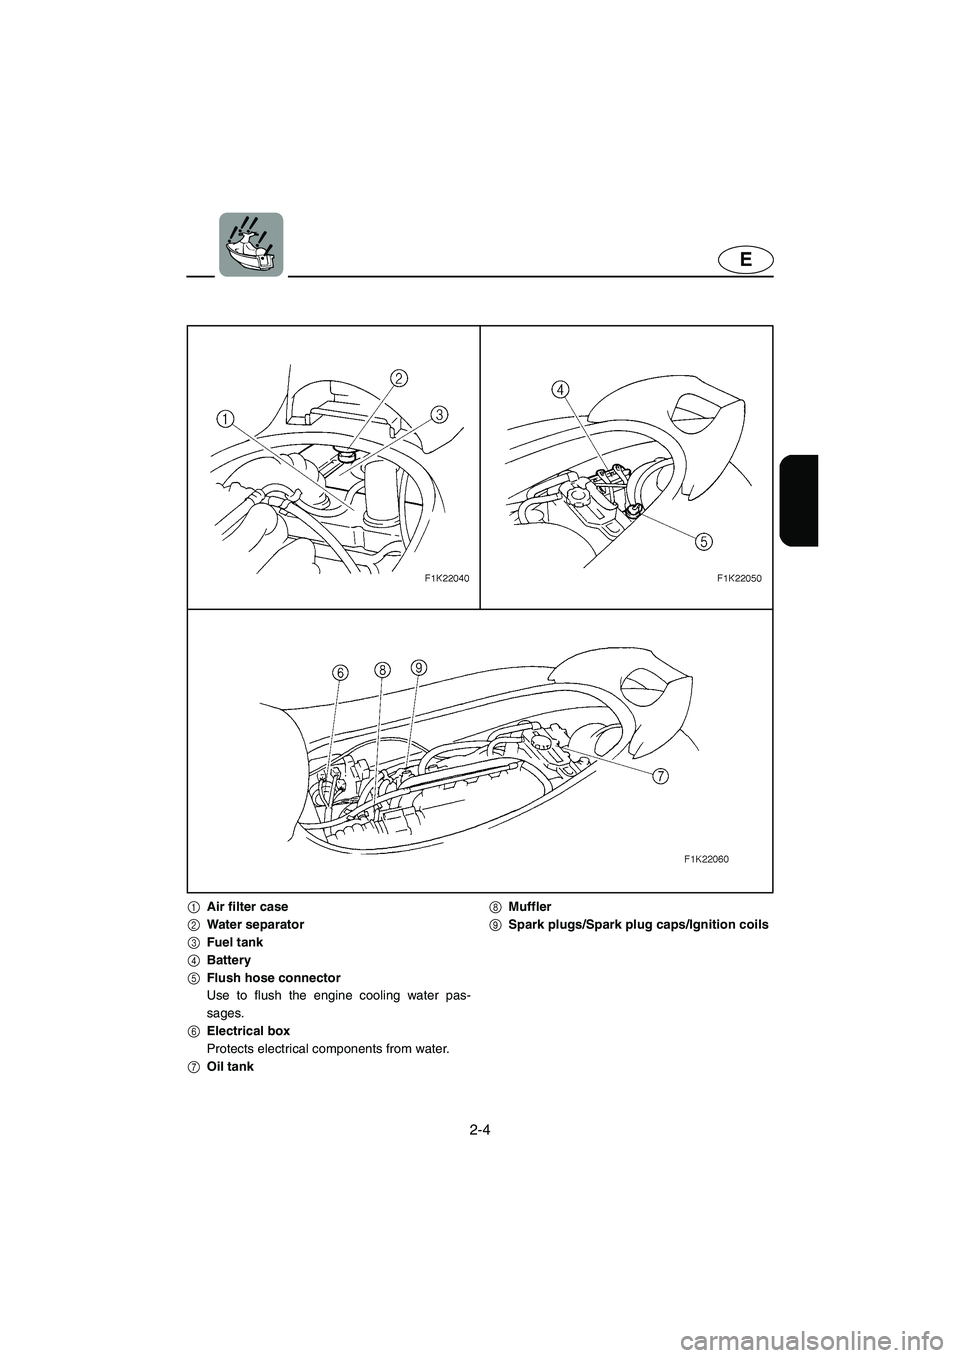 YAMAHA VX 2005  Owners Manual 2-4
E
1Air filter case
2Water separator
3Fuel tank
4Battery
5Flush hose connector
Use to flush the engine cooling water pas-
sages.
6Electrical box
Protects electrical components from water.
7Oil tank